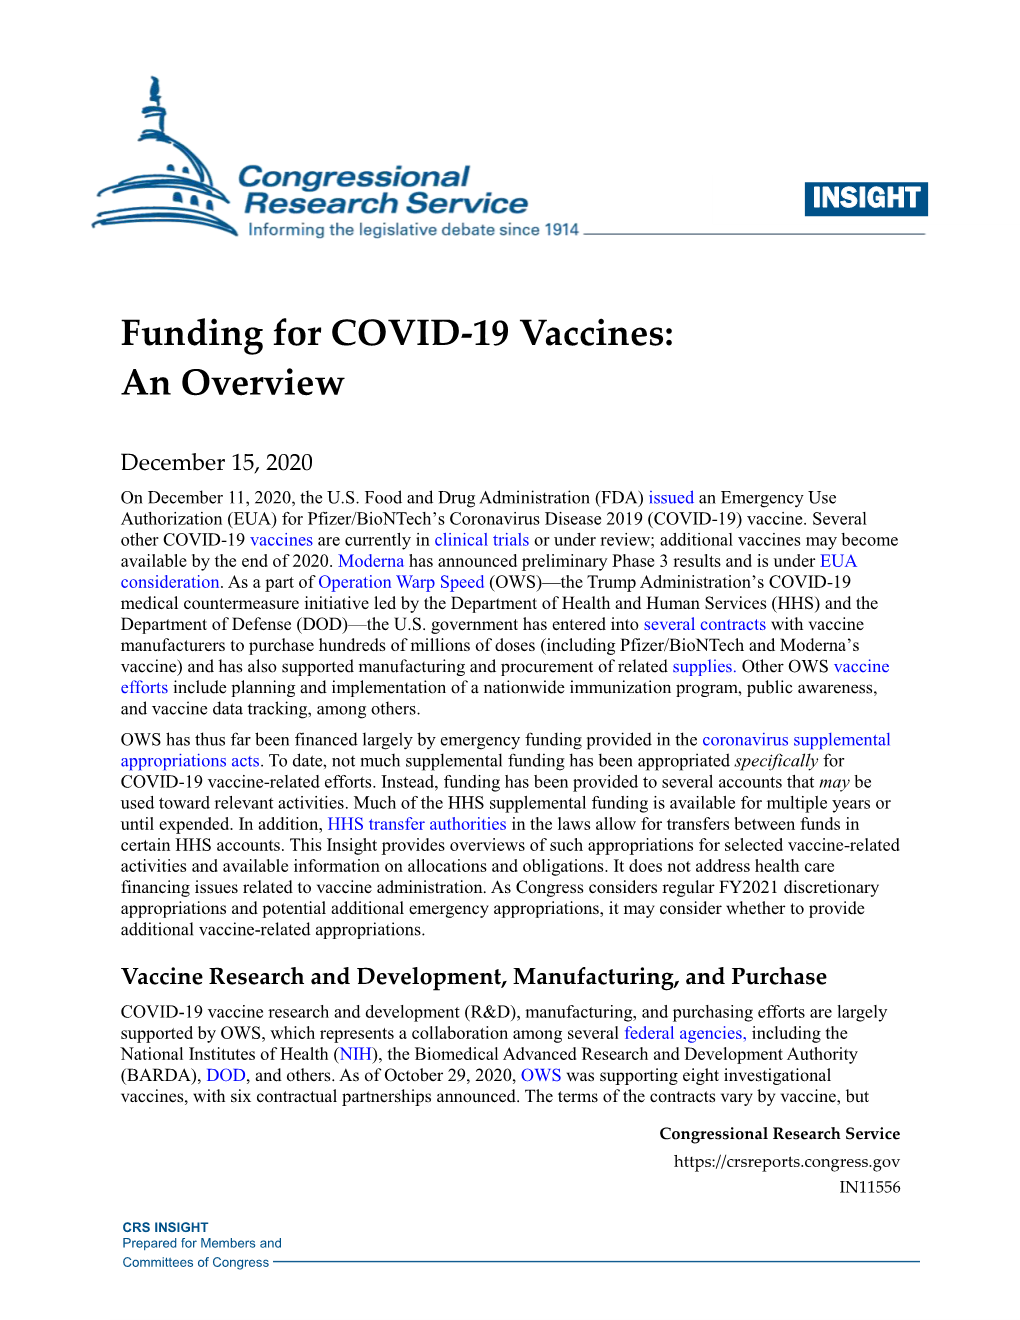 Funding for COVID-19 Vaccines: an Overview